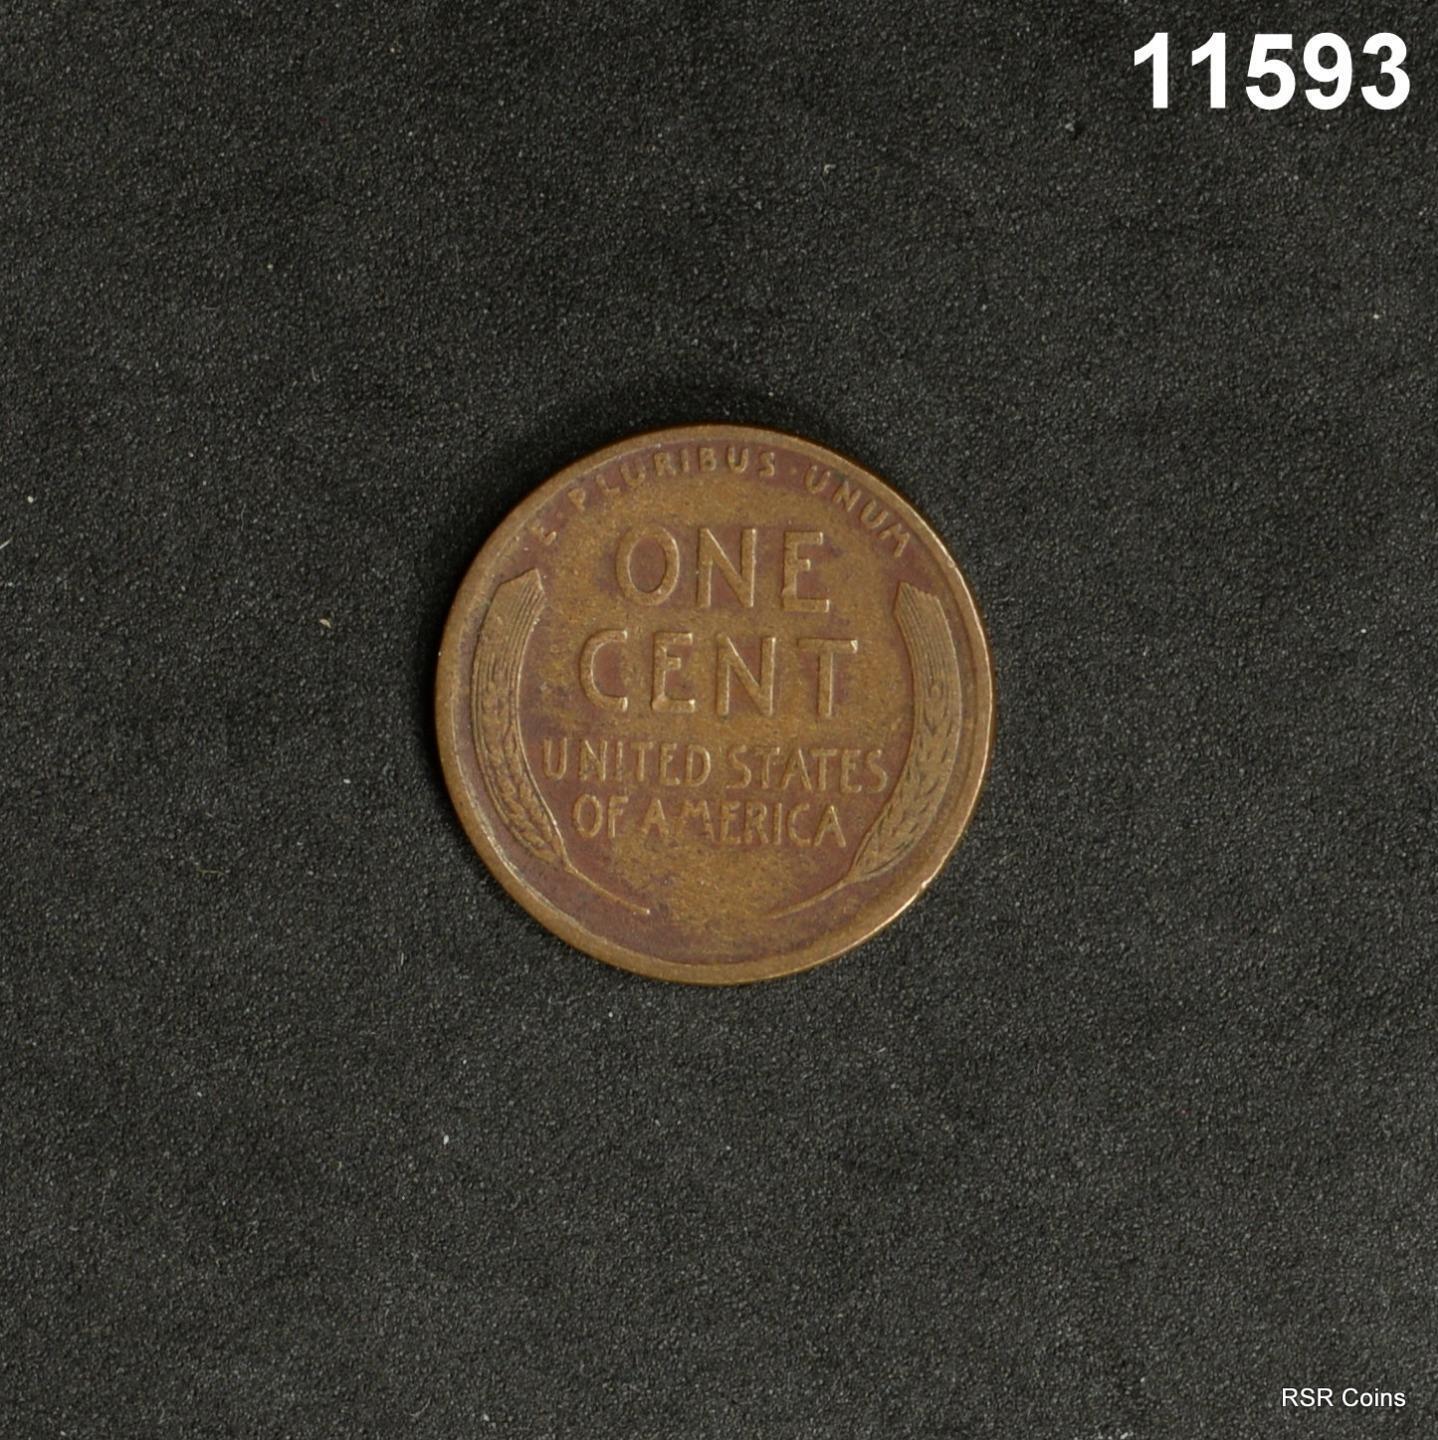 1910 S LINCOLN CENT VF KEY! #11593